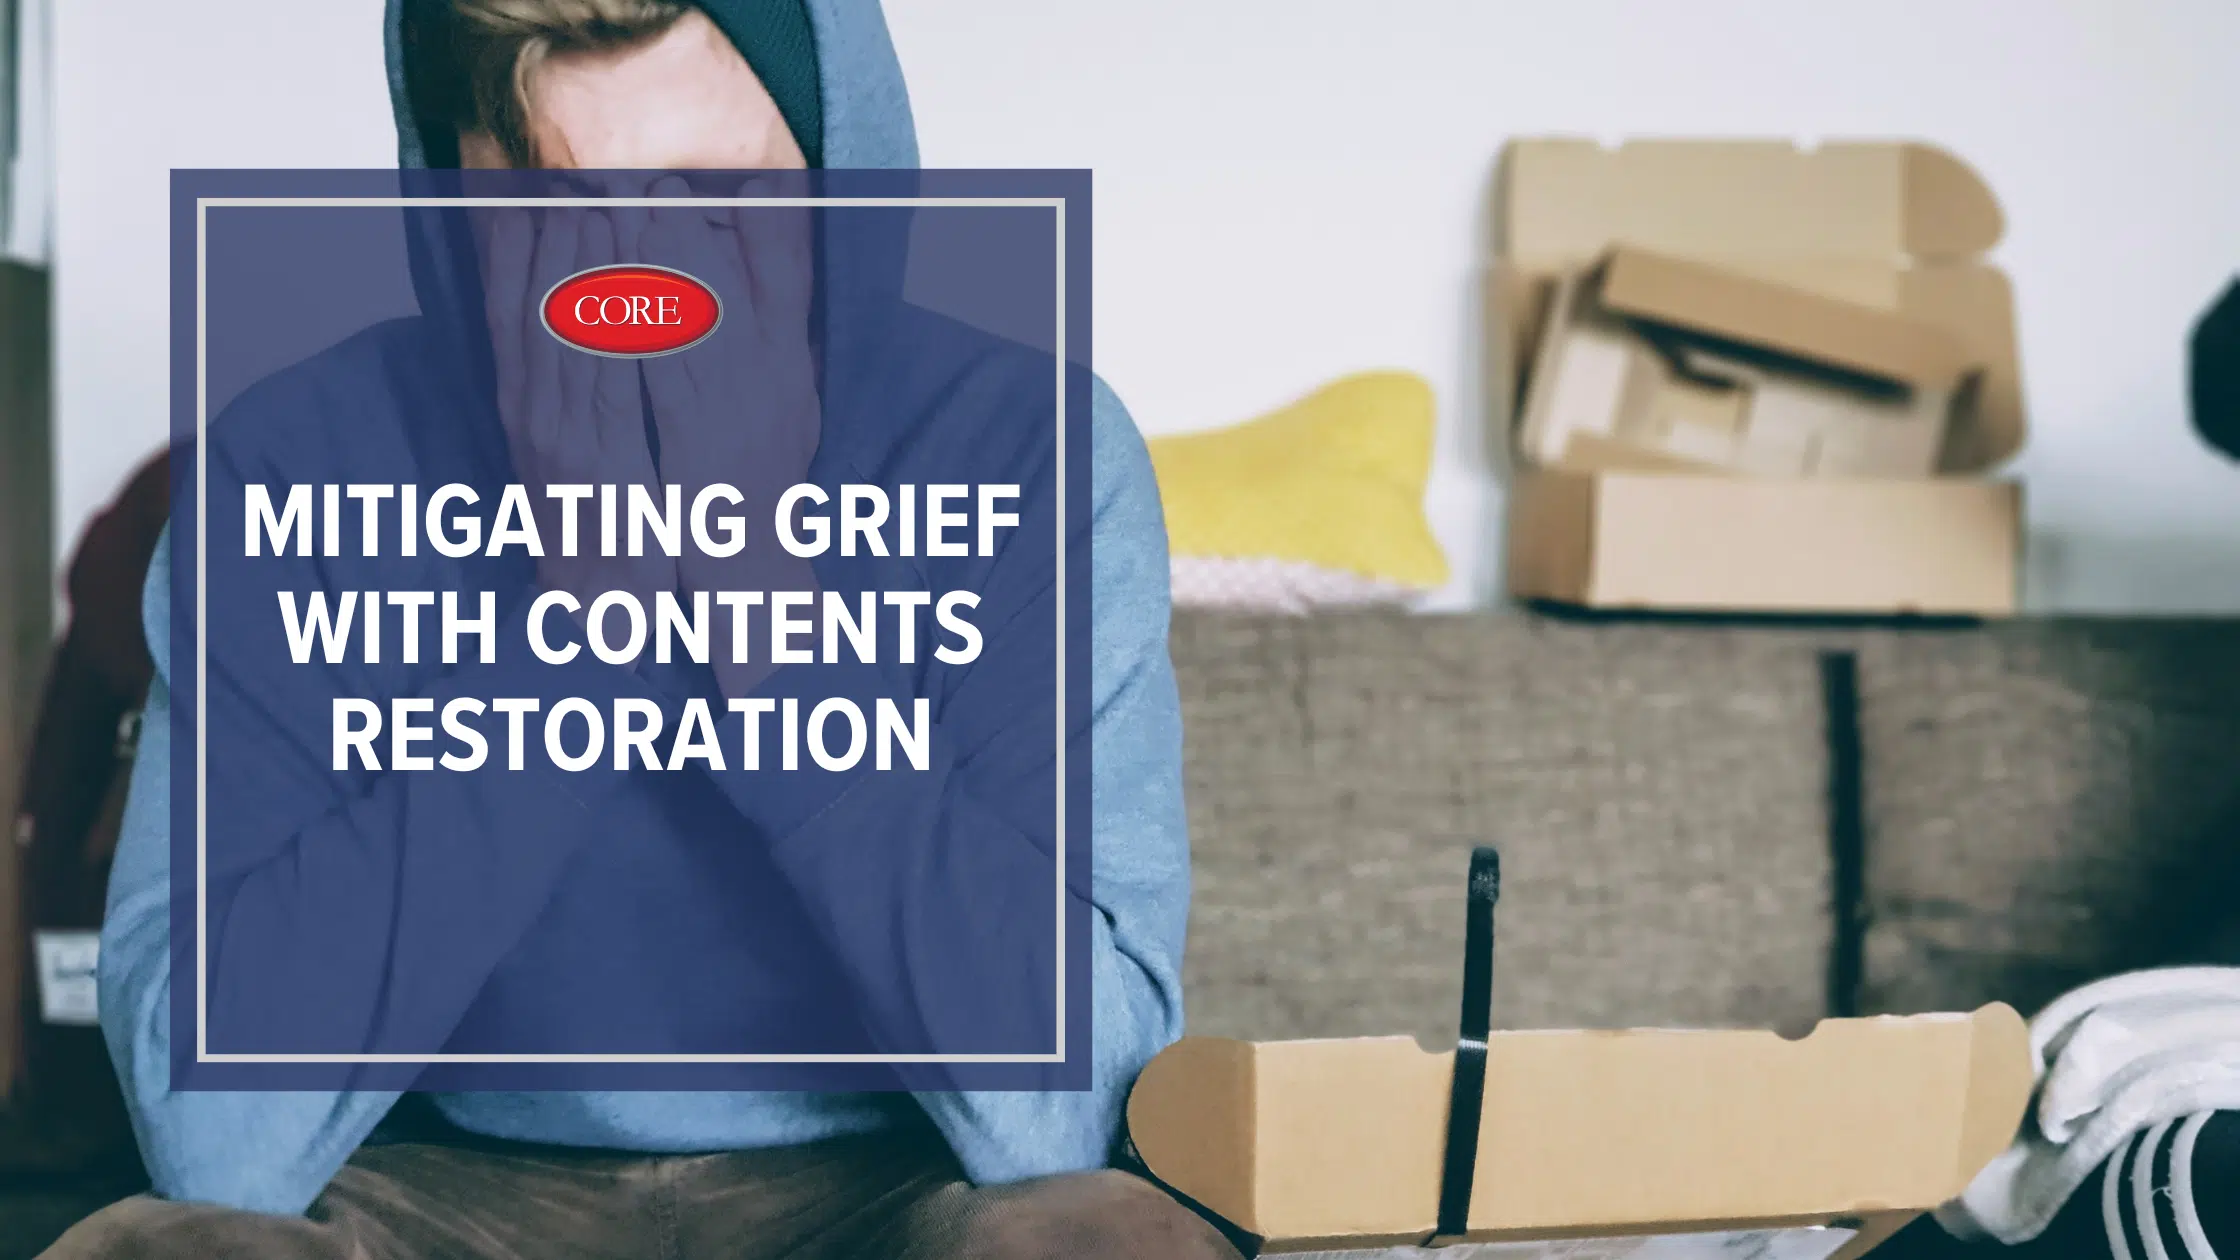 Mitigating grief with contents restoration